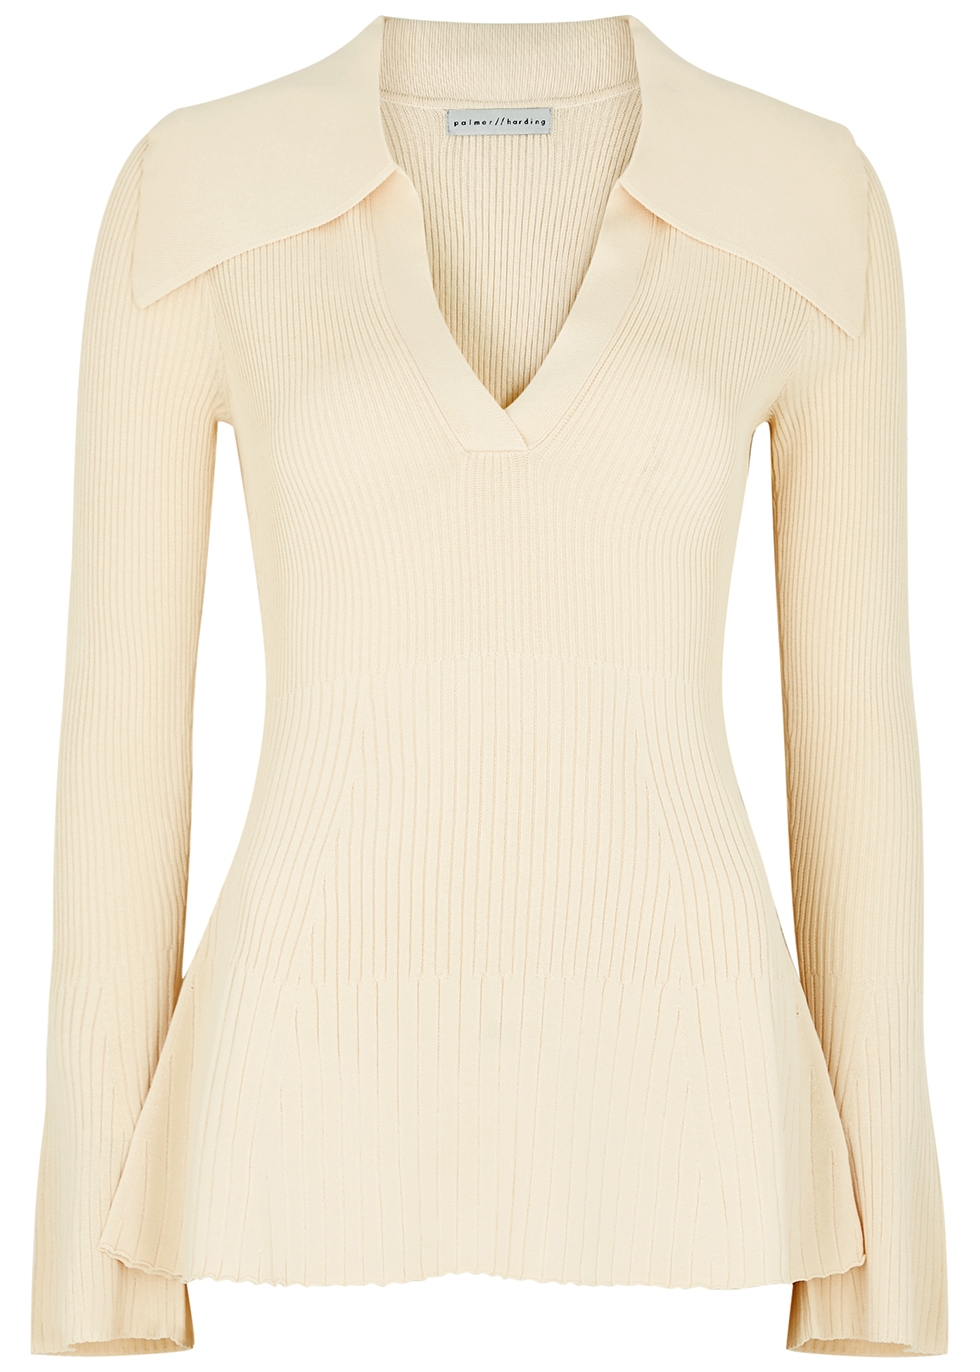 PALMER HARDING FRACTURE IVORY RIBBED-KNIT TOP